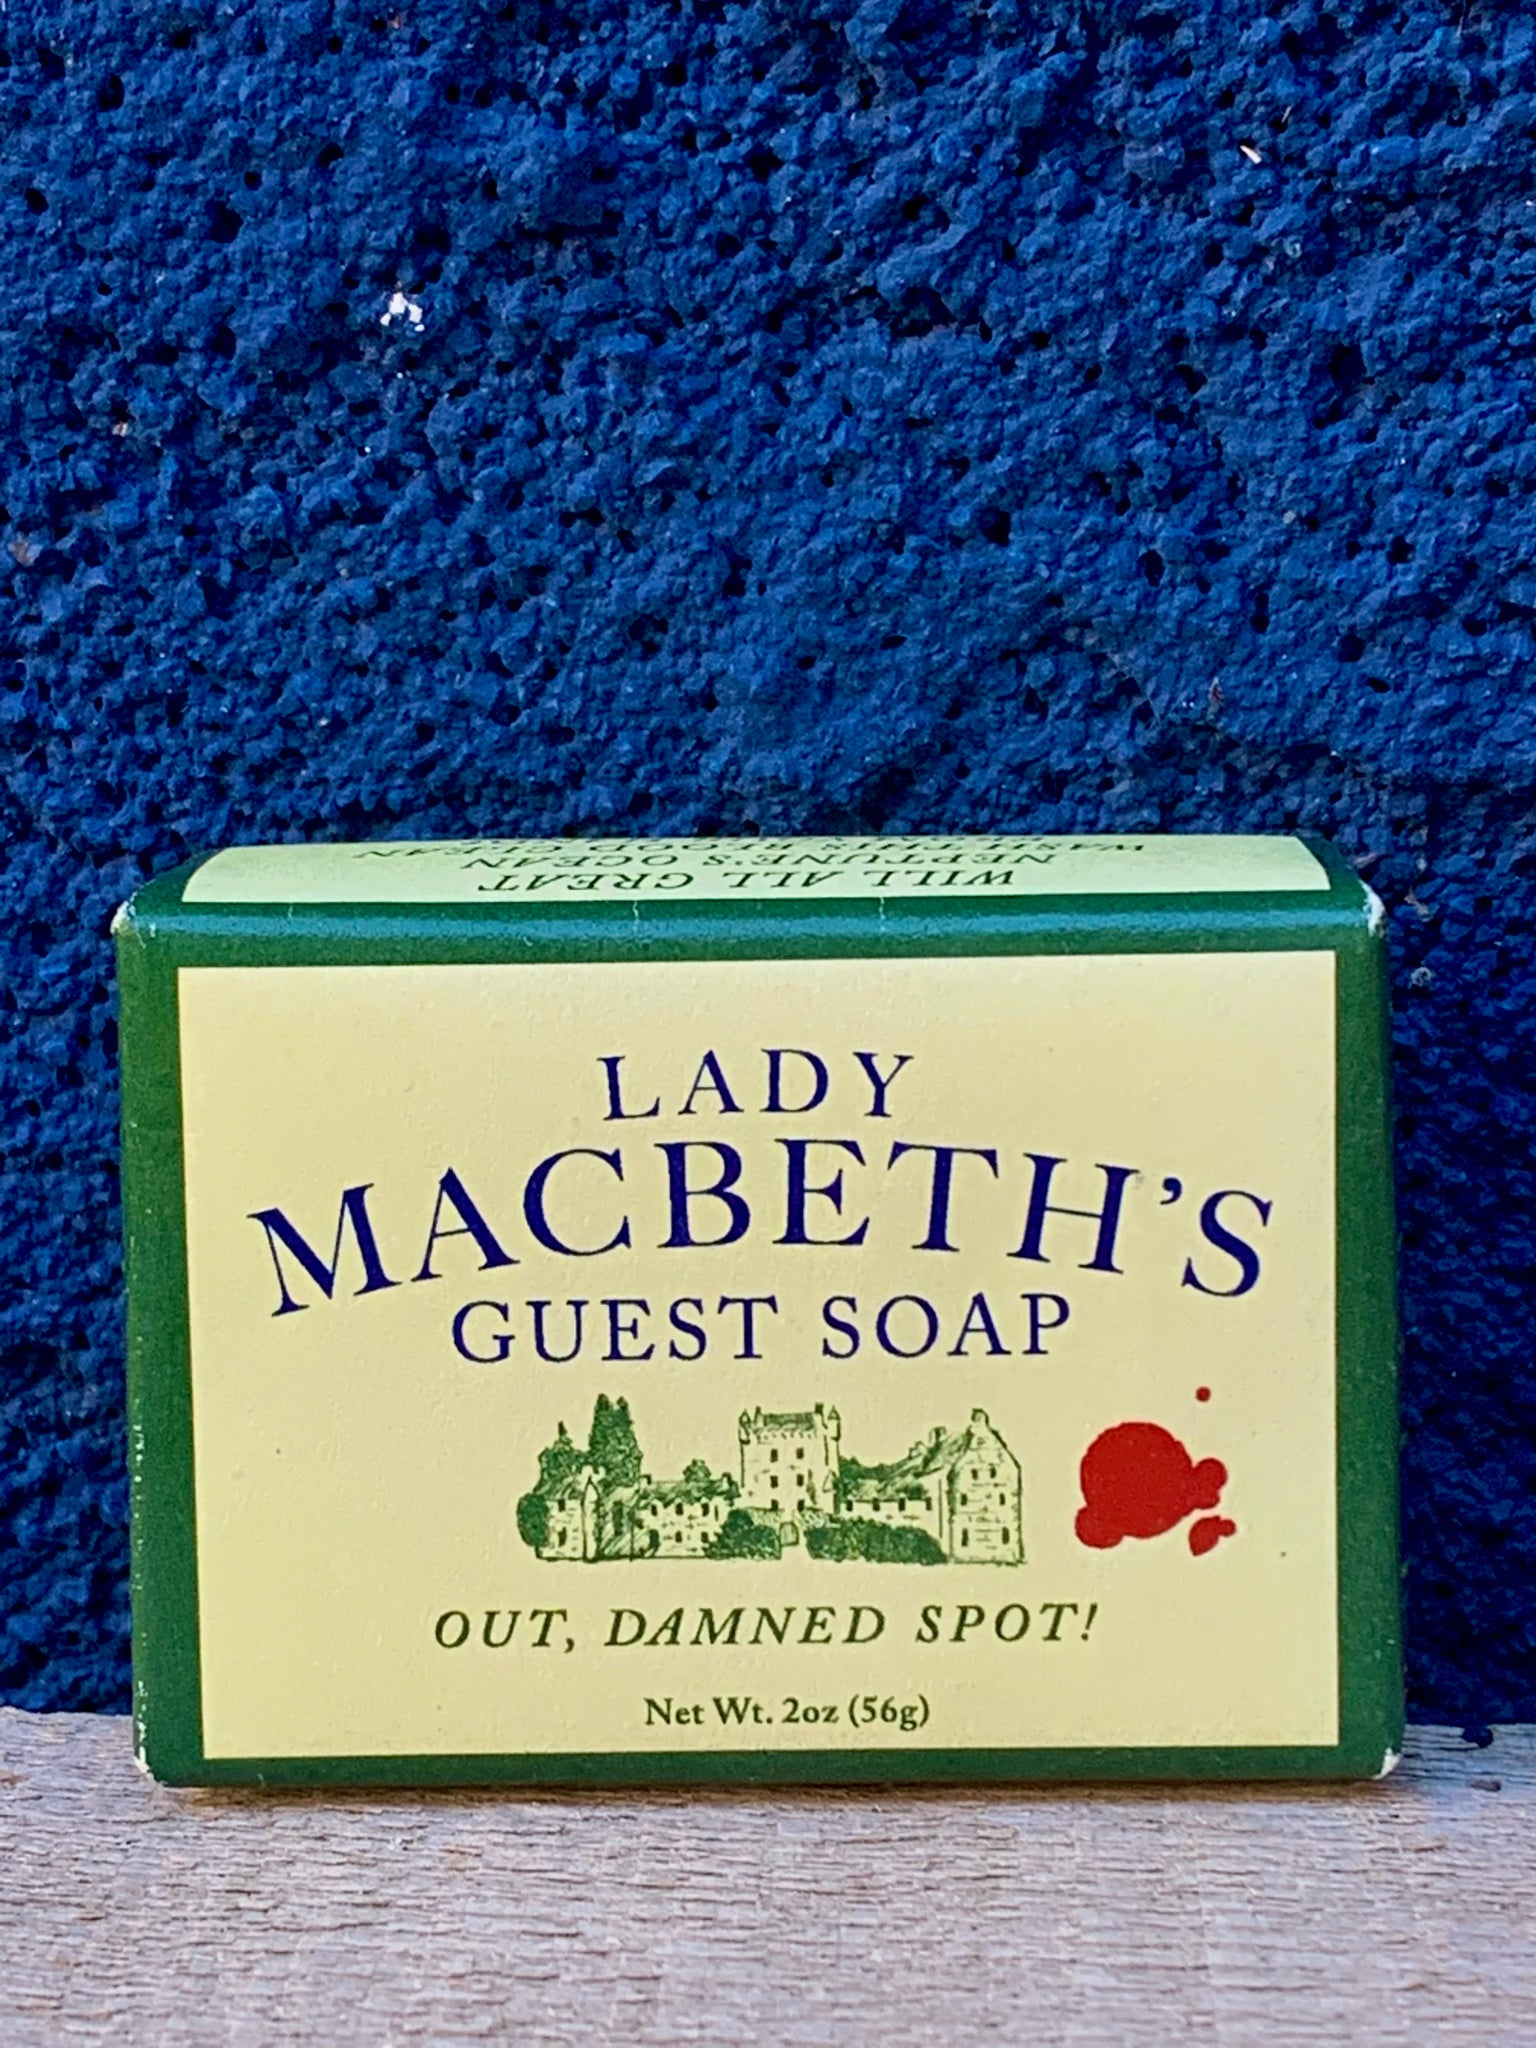 Lady Macbeth’s Guest Soap